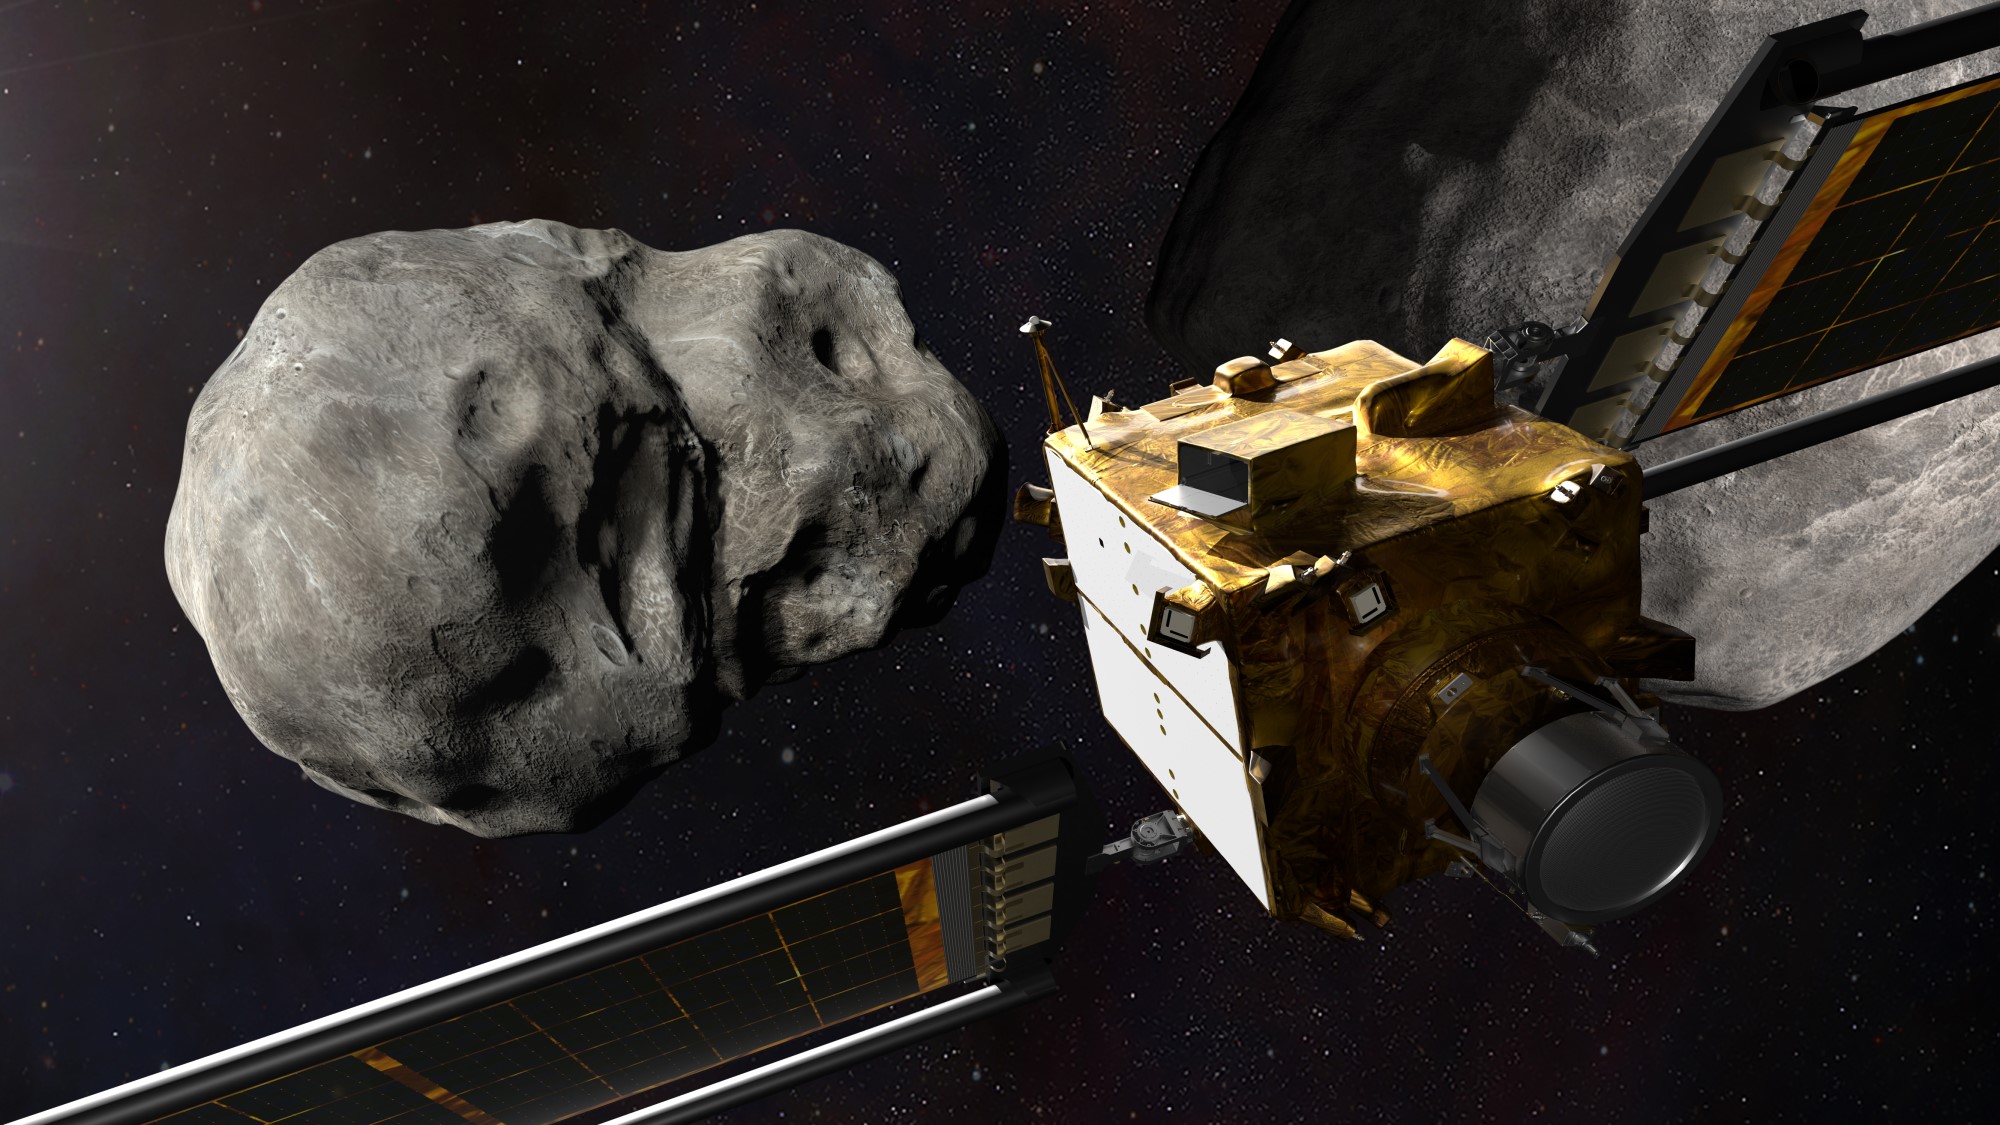 boxy spacecraft approaching large rock